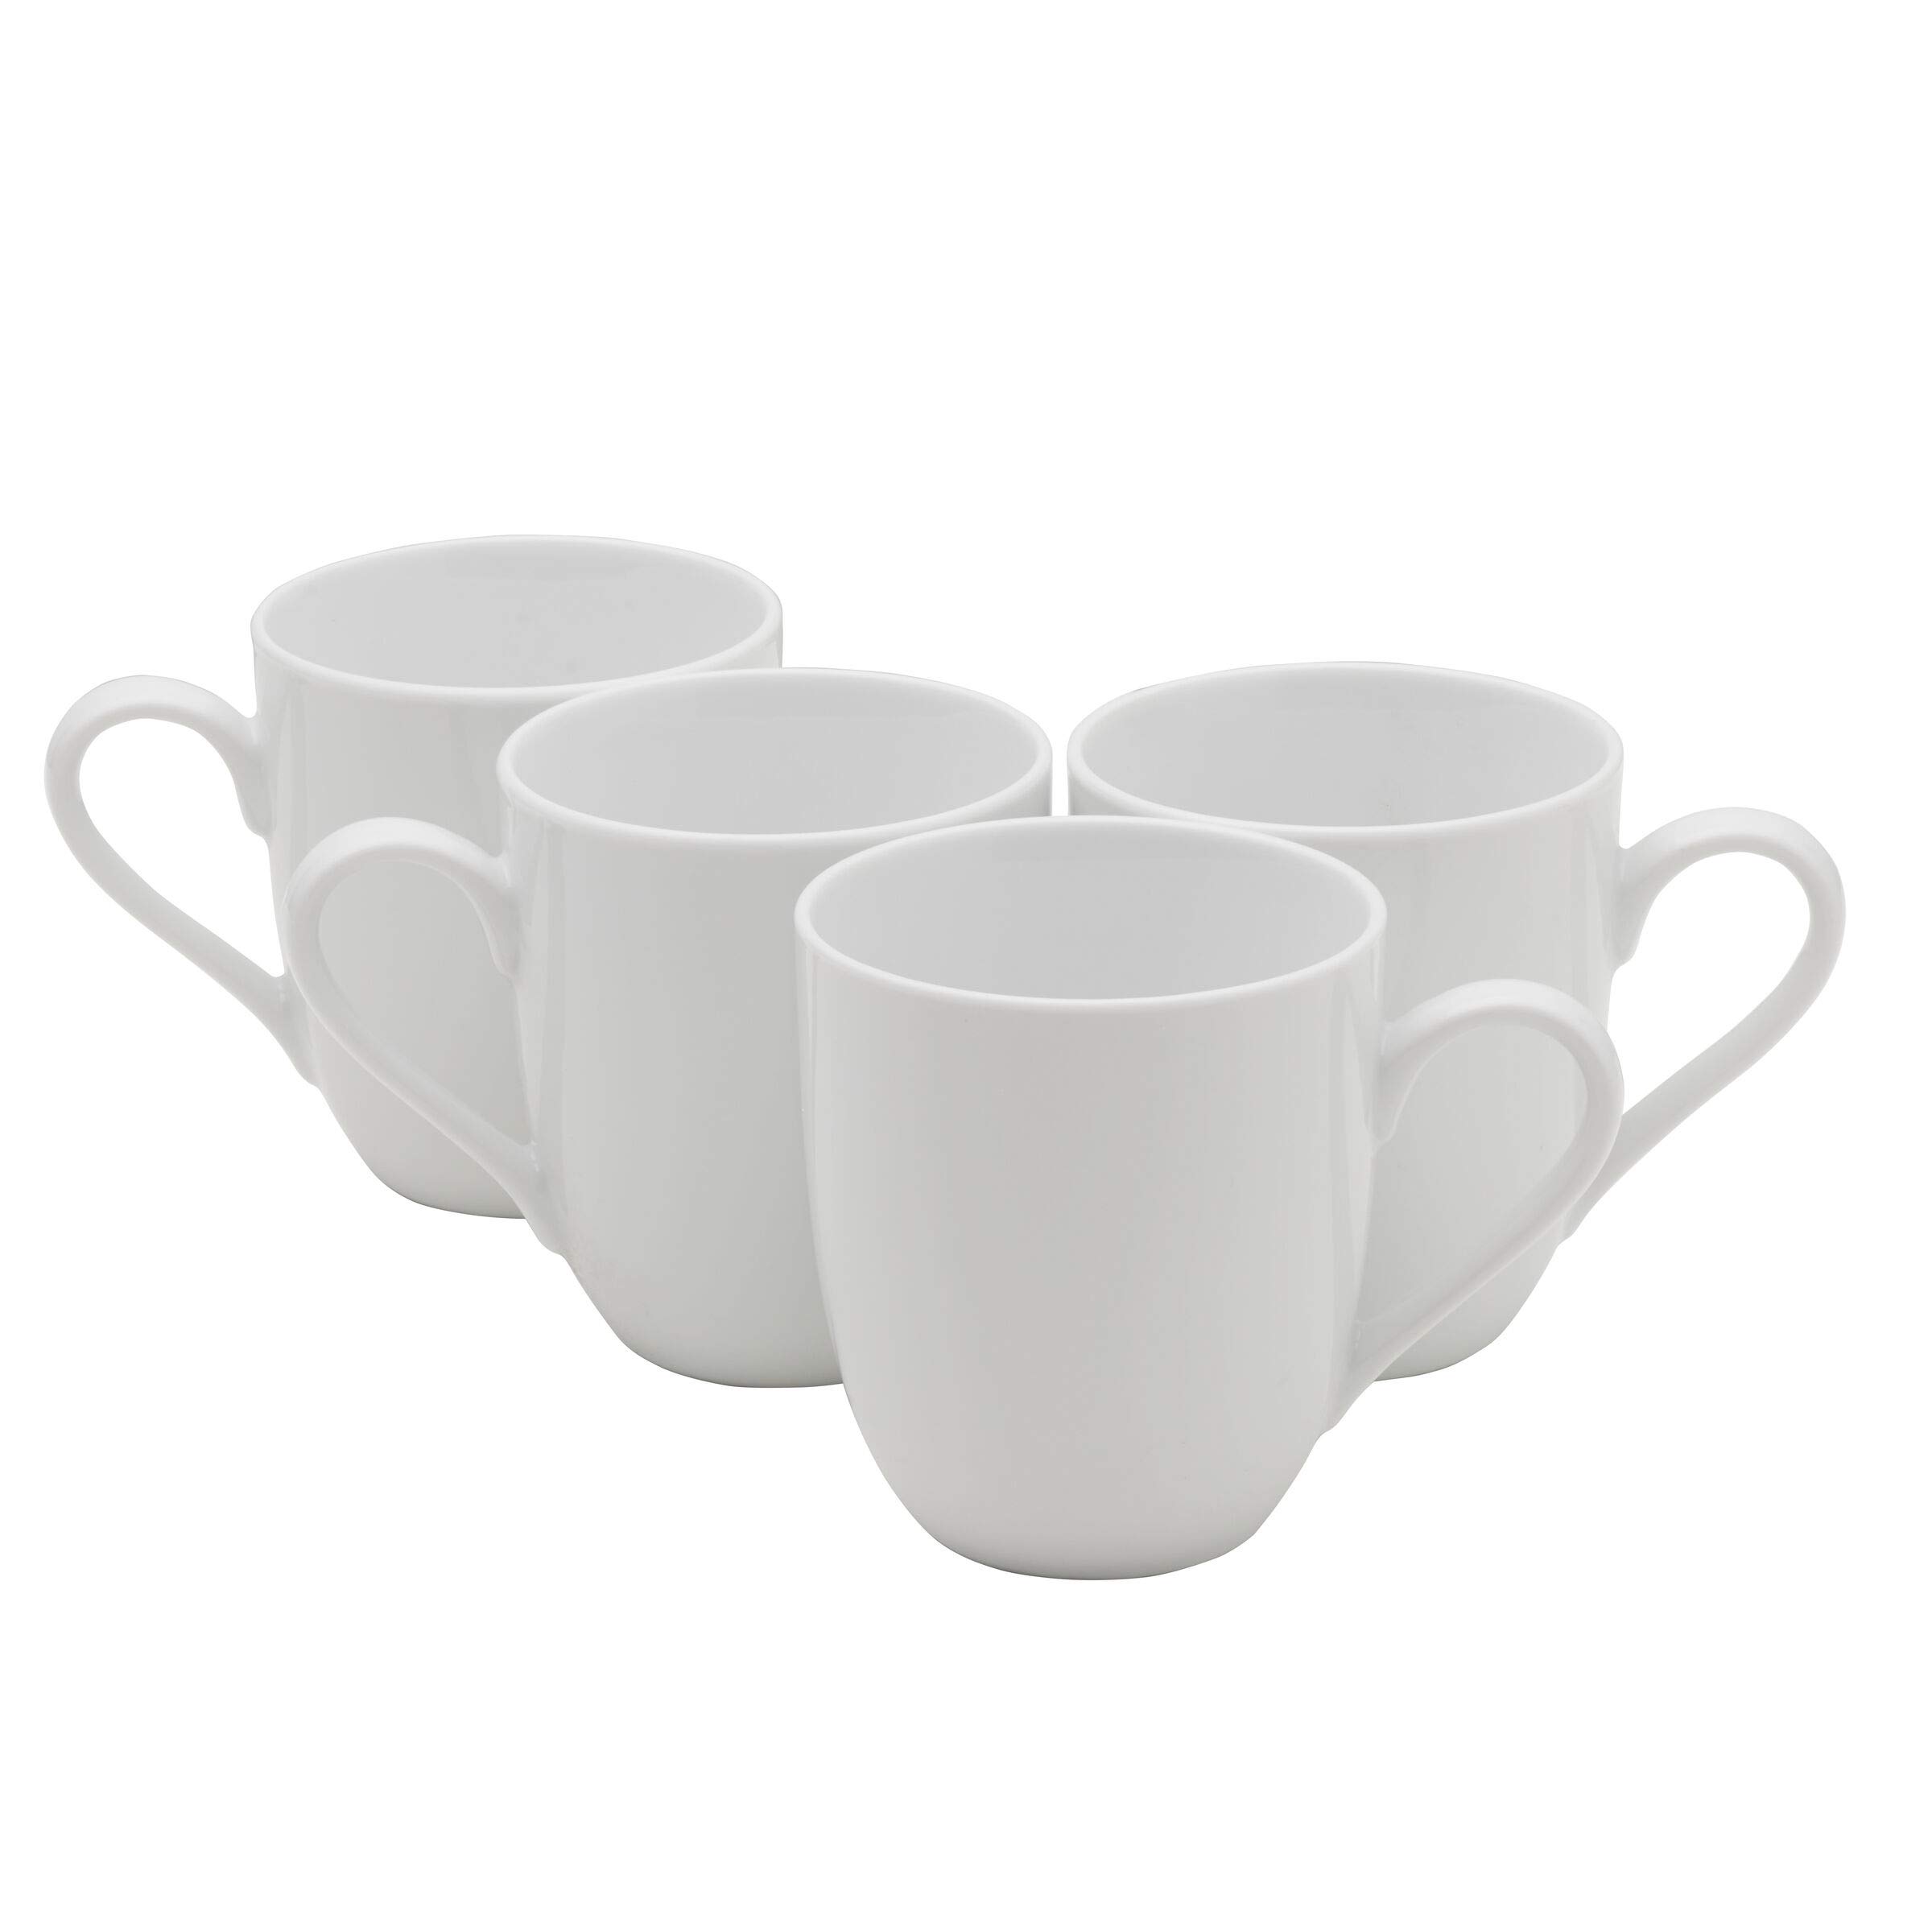 Everyday White by Fitz and Floyd 12 Ounce Mugs, Set of 4, 4 Count (Pack of 1)